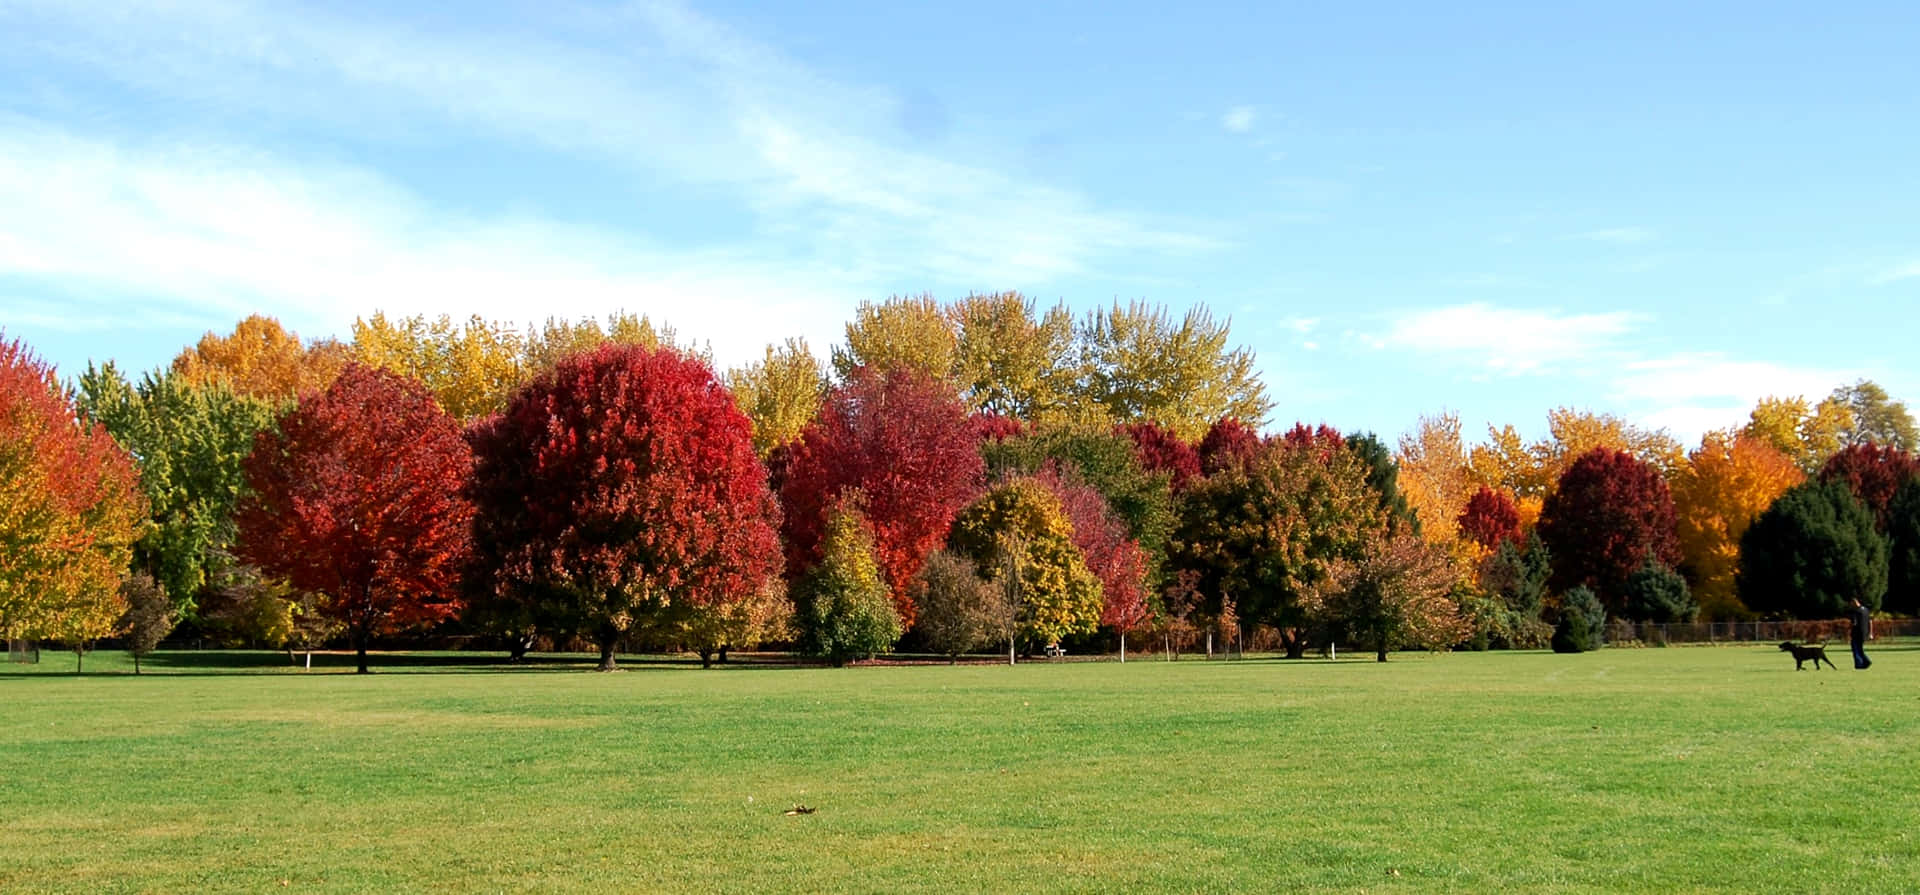 Wide Field Beautiful Fall Trees Pictures 2500 x 1165 Picture